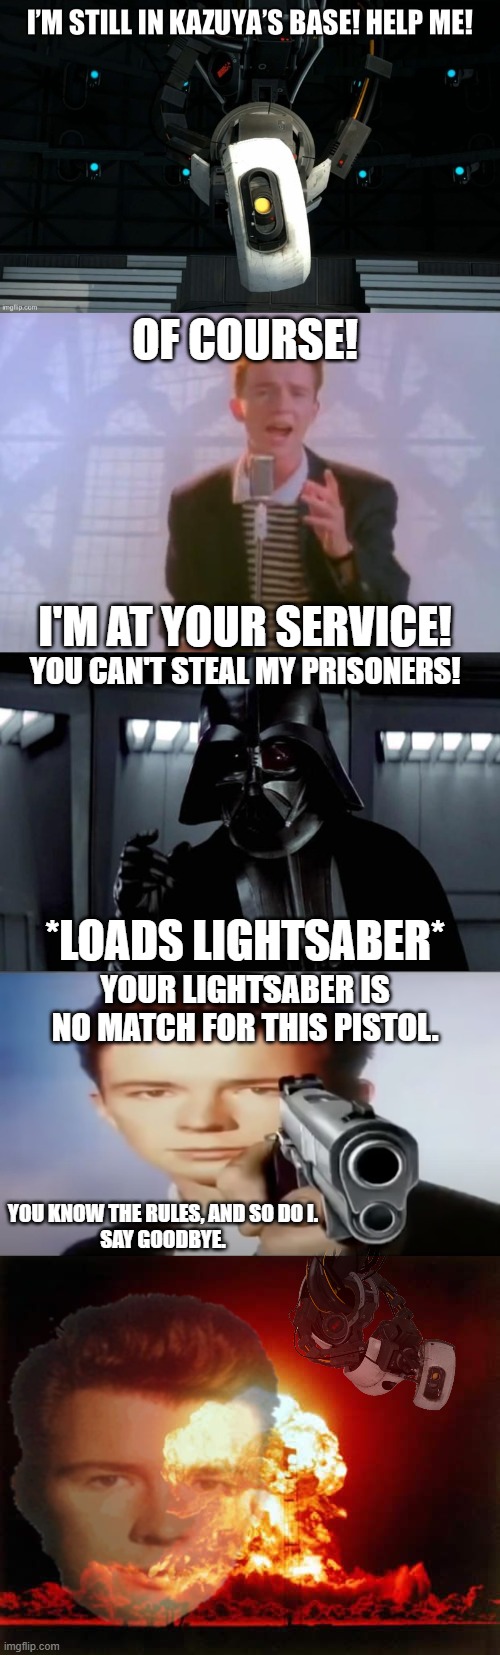 OF COURSE! I'M AT YOUR SERVICE! YOU CAN'T STEAL MY PRISONERS! *LOADS LIGHTSABER*; YOUR LIGHTSABER IS NO MATCH FOR THIS PISTOL. YOU KNOW THE RULES, AND SO DO I.
SAY GOODBYE. | image tagged in rick astley,darth vader,you know the rules and so do i say goodbye,memes,nuclear explosion | made w/ Imgflip meme maker